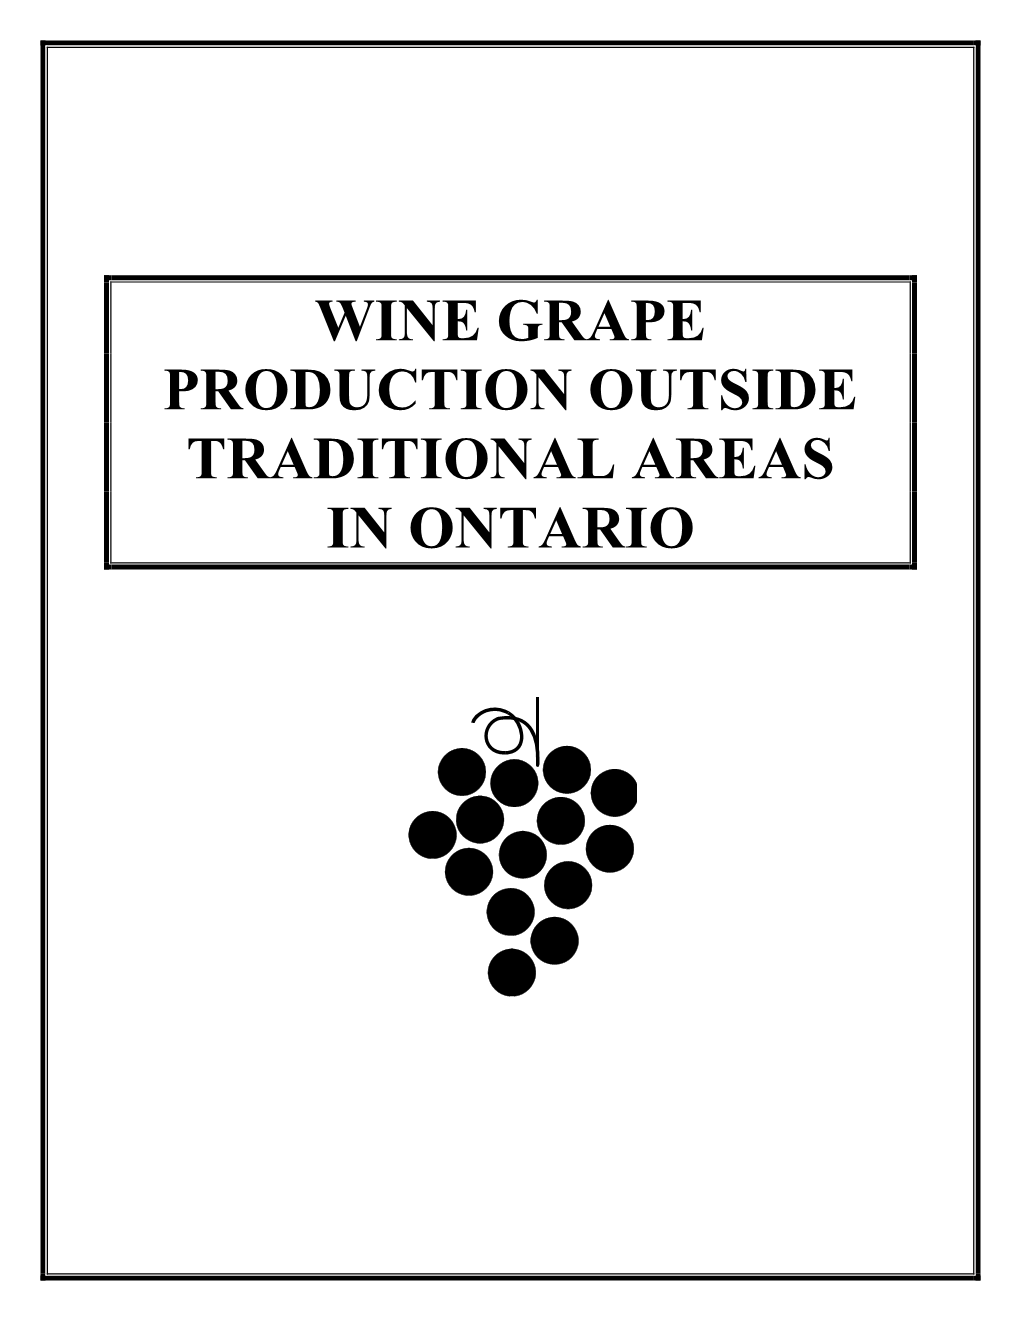 Wine Grape Production Outside Traditional Areas in Ontario